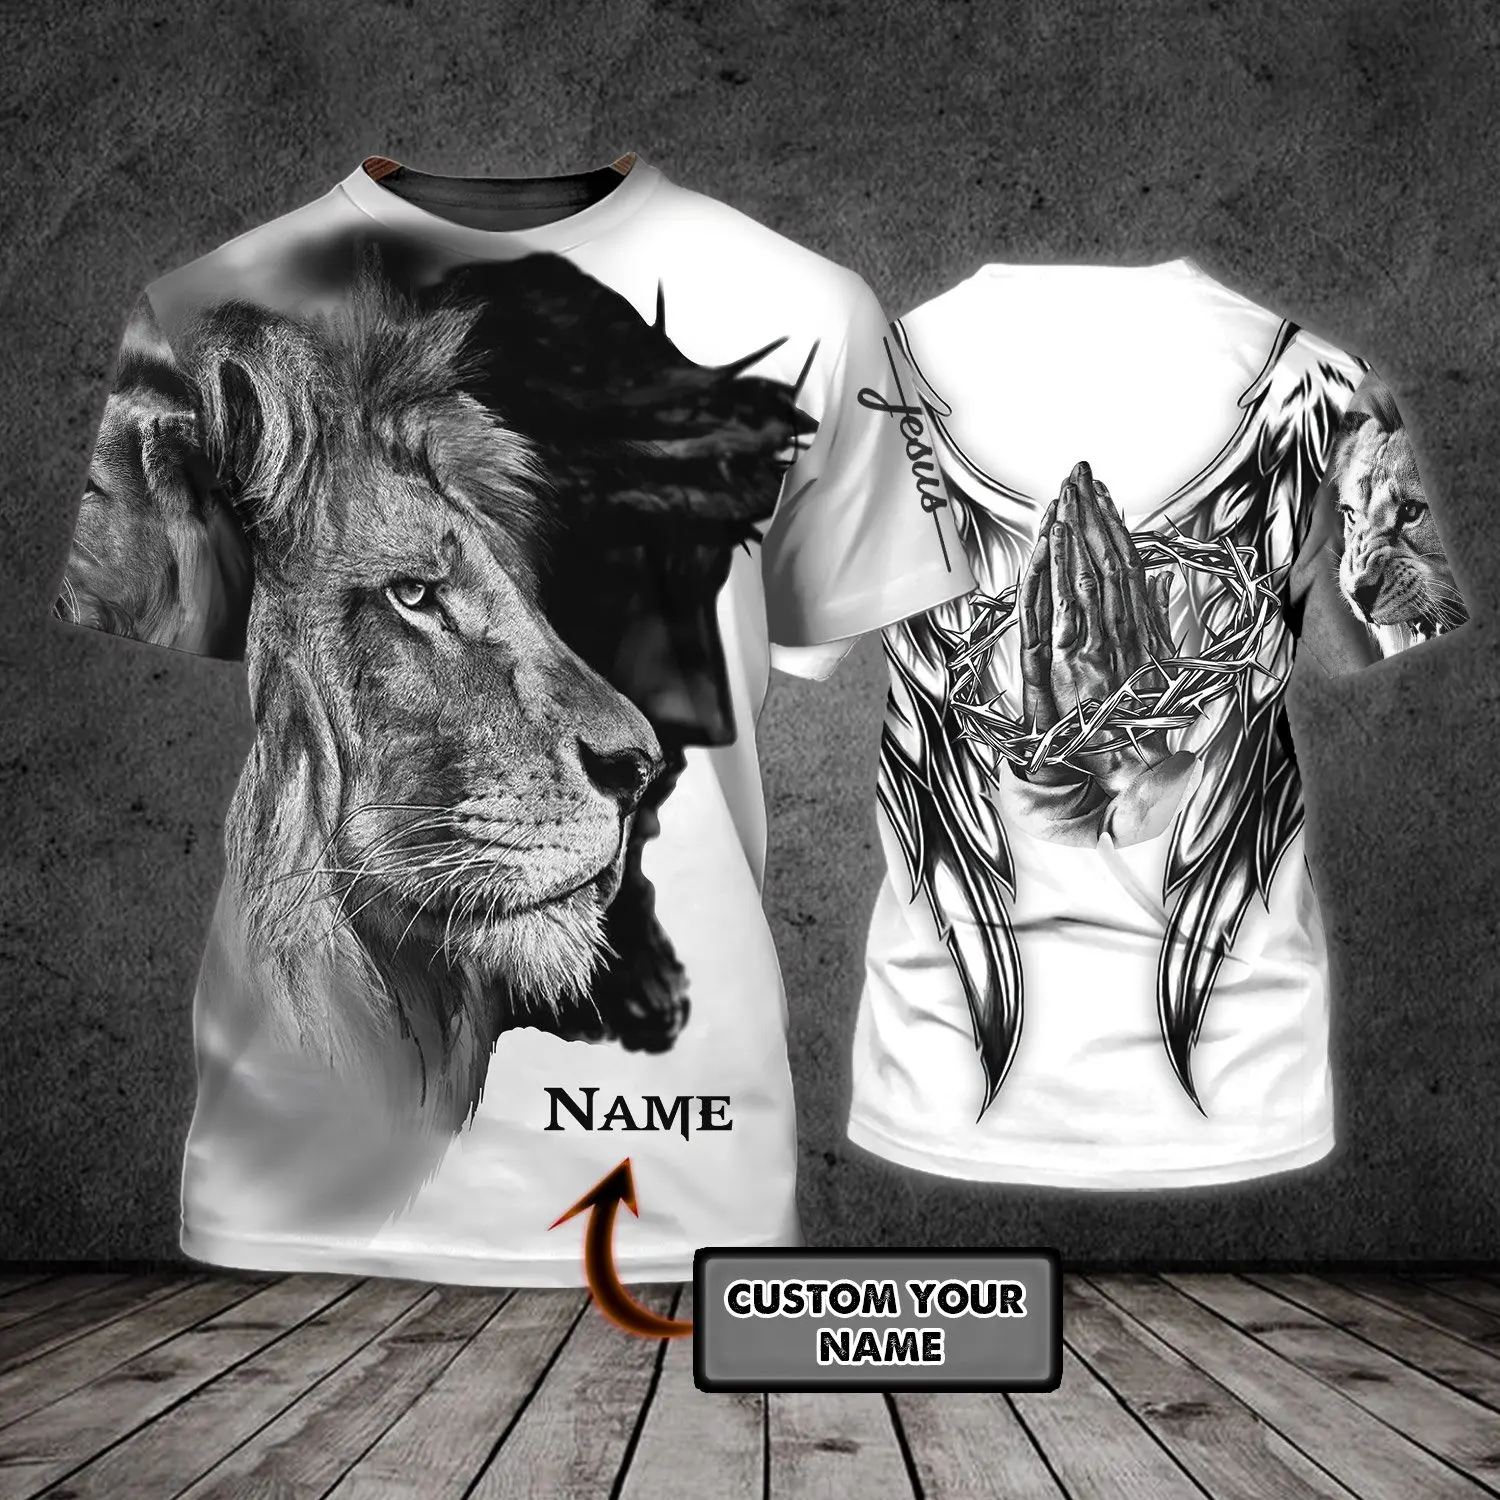 

XS-7XL Summer Fashion Men t shirt THE KING - Jesus and Lion Personalized Name 3D Printed Casual Cool Tee shirts Unisex Tshirt 04